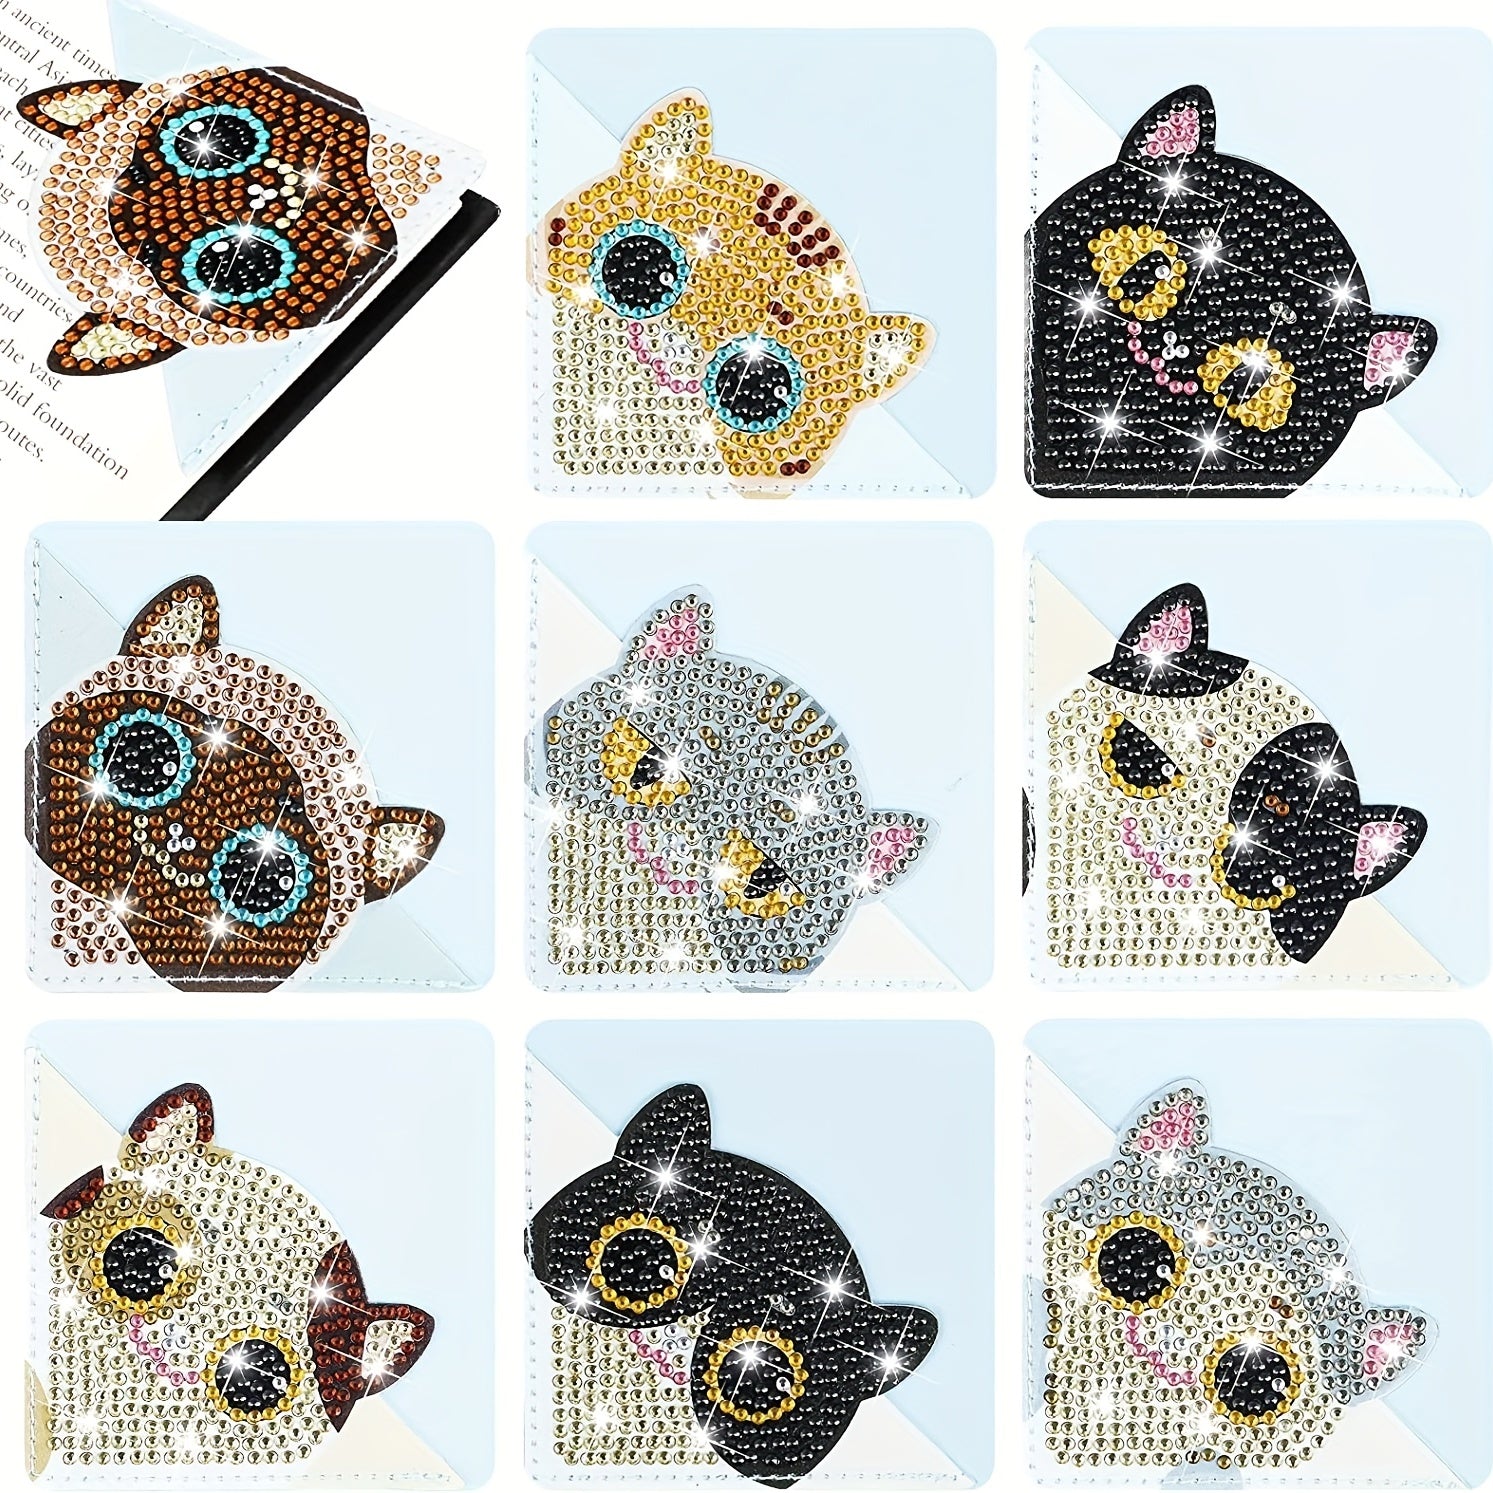 8pcsset DIY Diamond Painting Kit Corner Bookmarks Cat Shaped Pattern Size 10cm4 Durable PU Leather With Crystal Rhinestone For Books Notes Special Shaped Cat Diamond Painting Bookmark Kits For Beginners